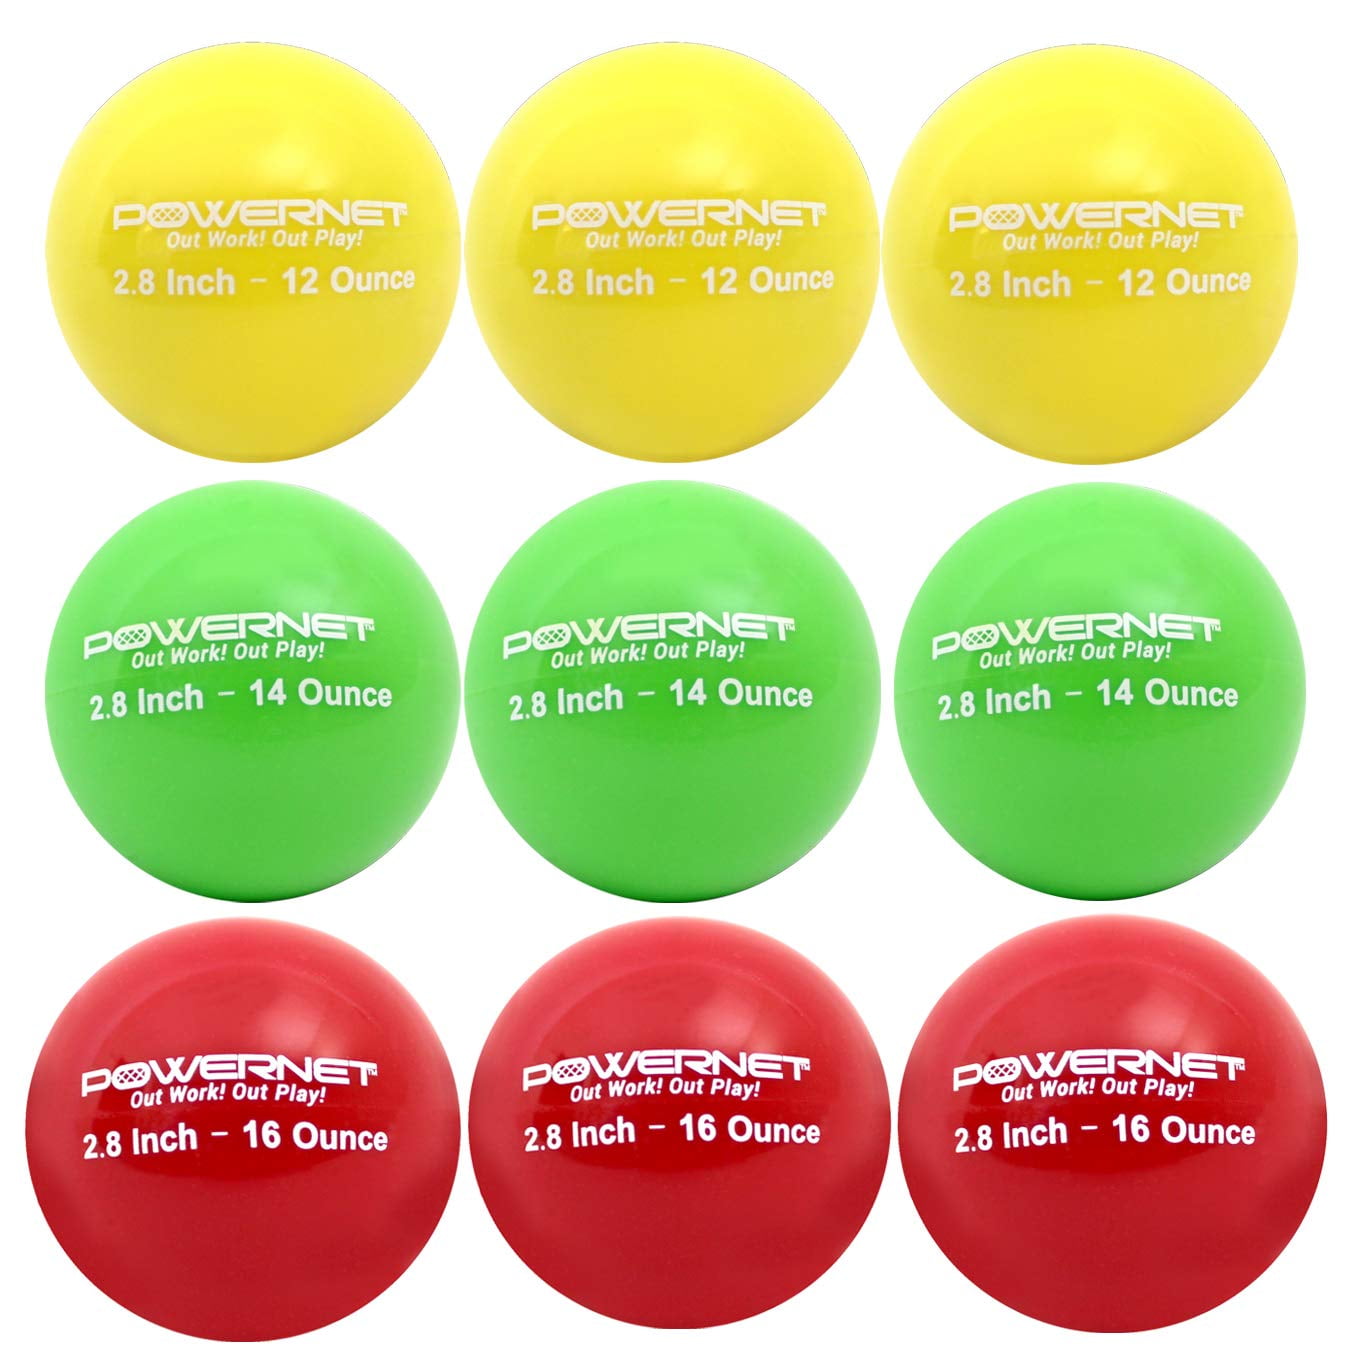 PowerNet 2.8" Weighted Hitting and Batting Training Ball 6 pack 